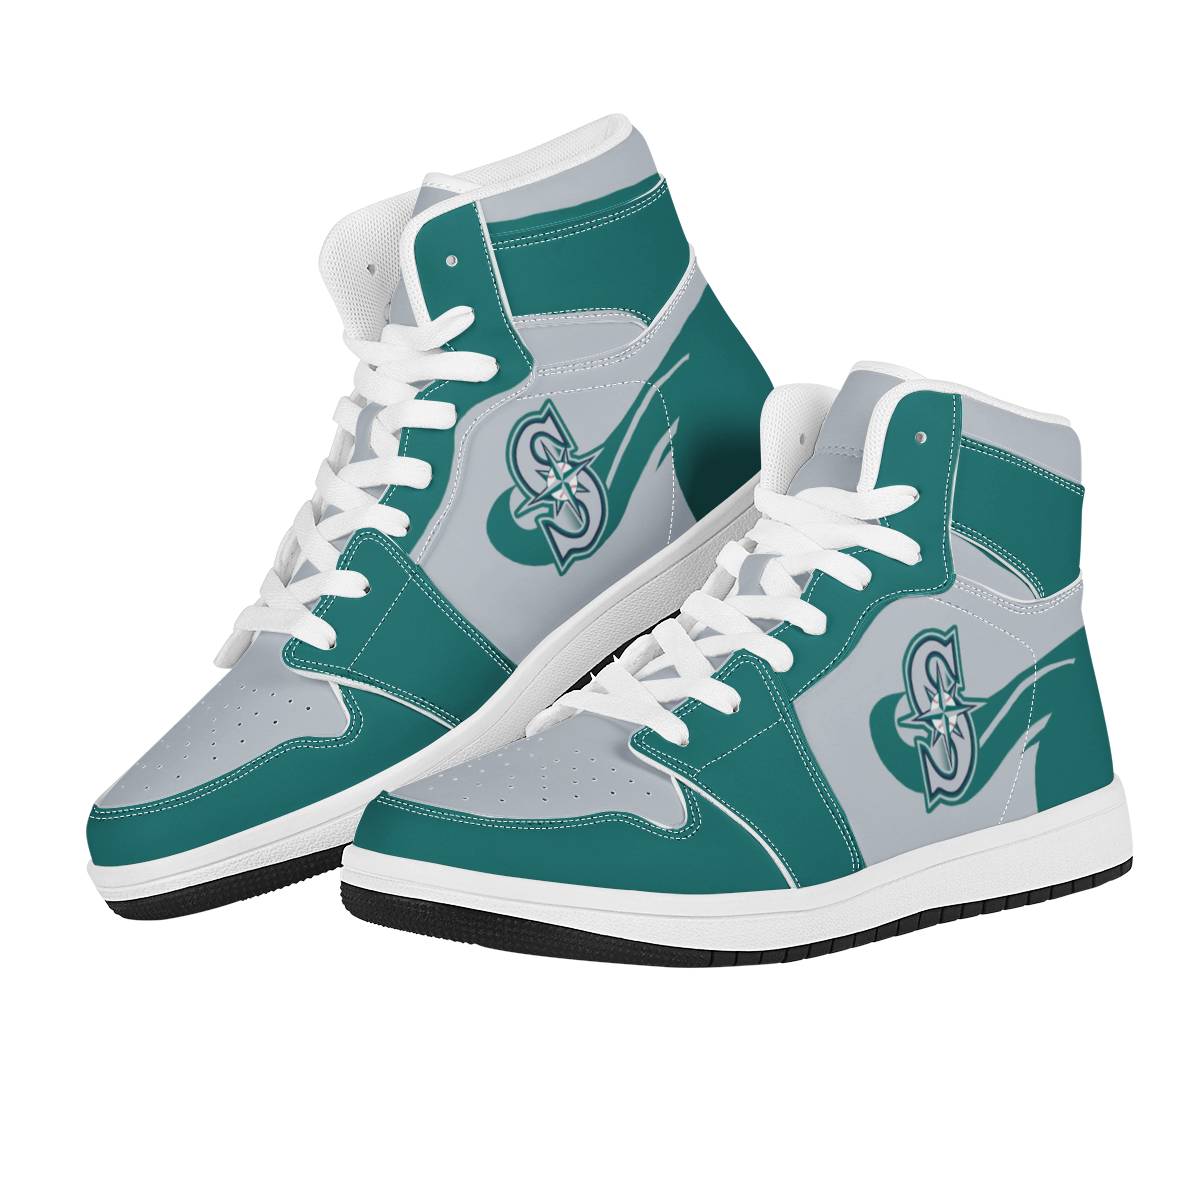 Women's Seattle Mariners High Top Leather AJ1 Sneakers 001